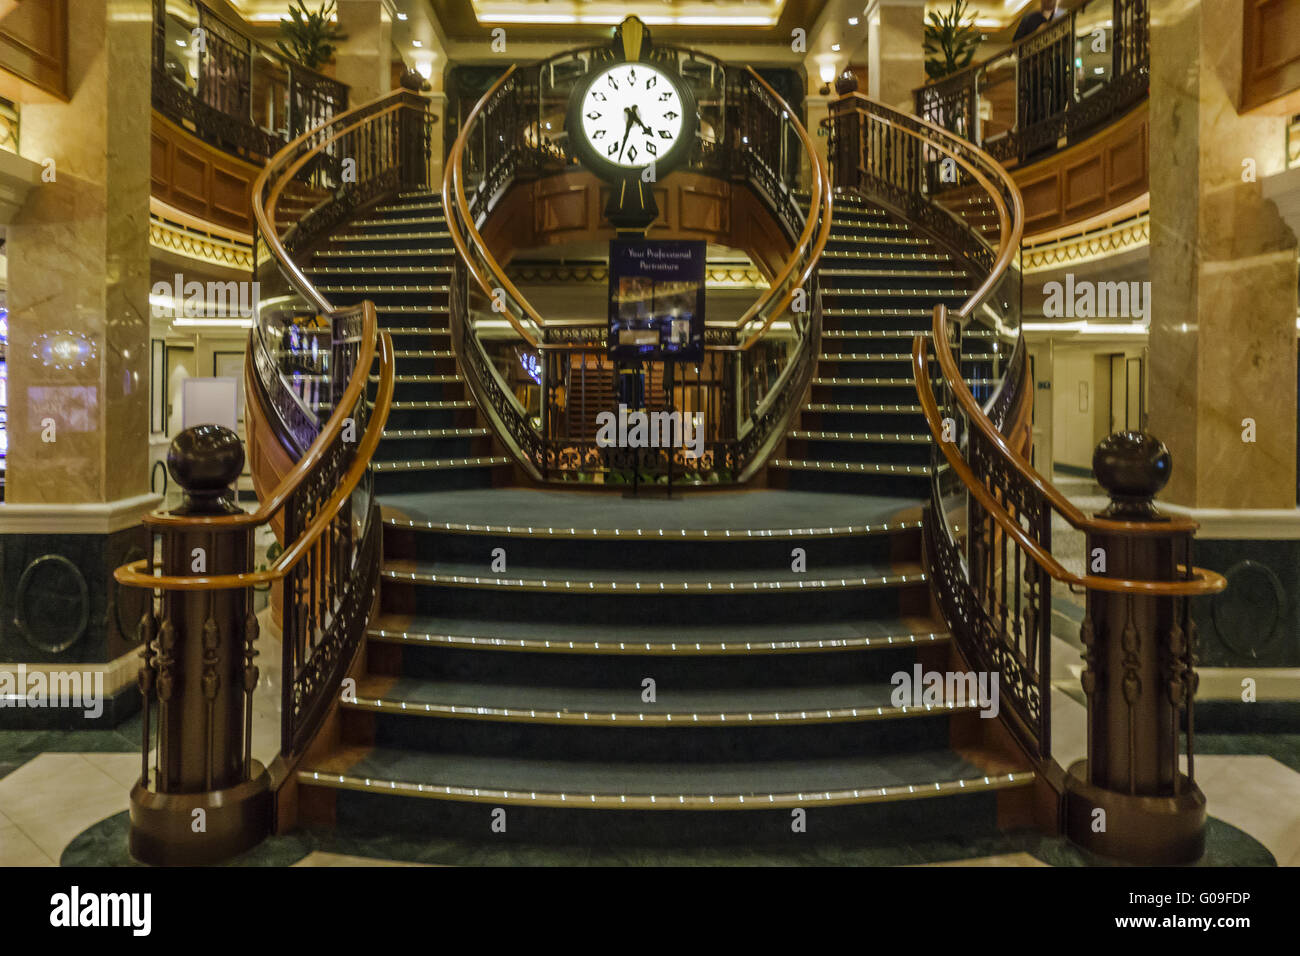 Ship Queen Elizabeth Midships Stairs and Clock Stock Photo